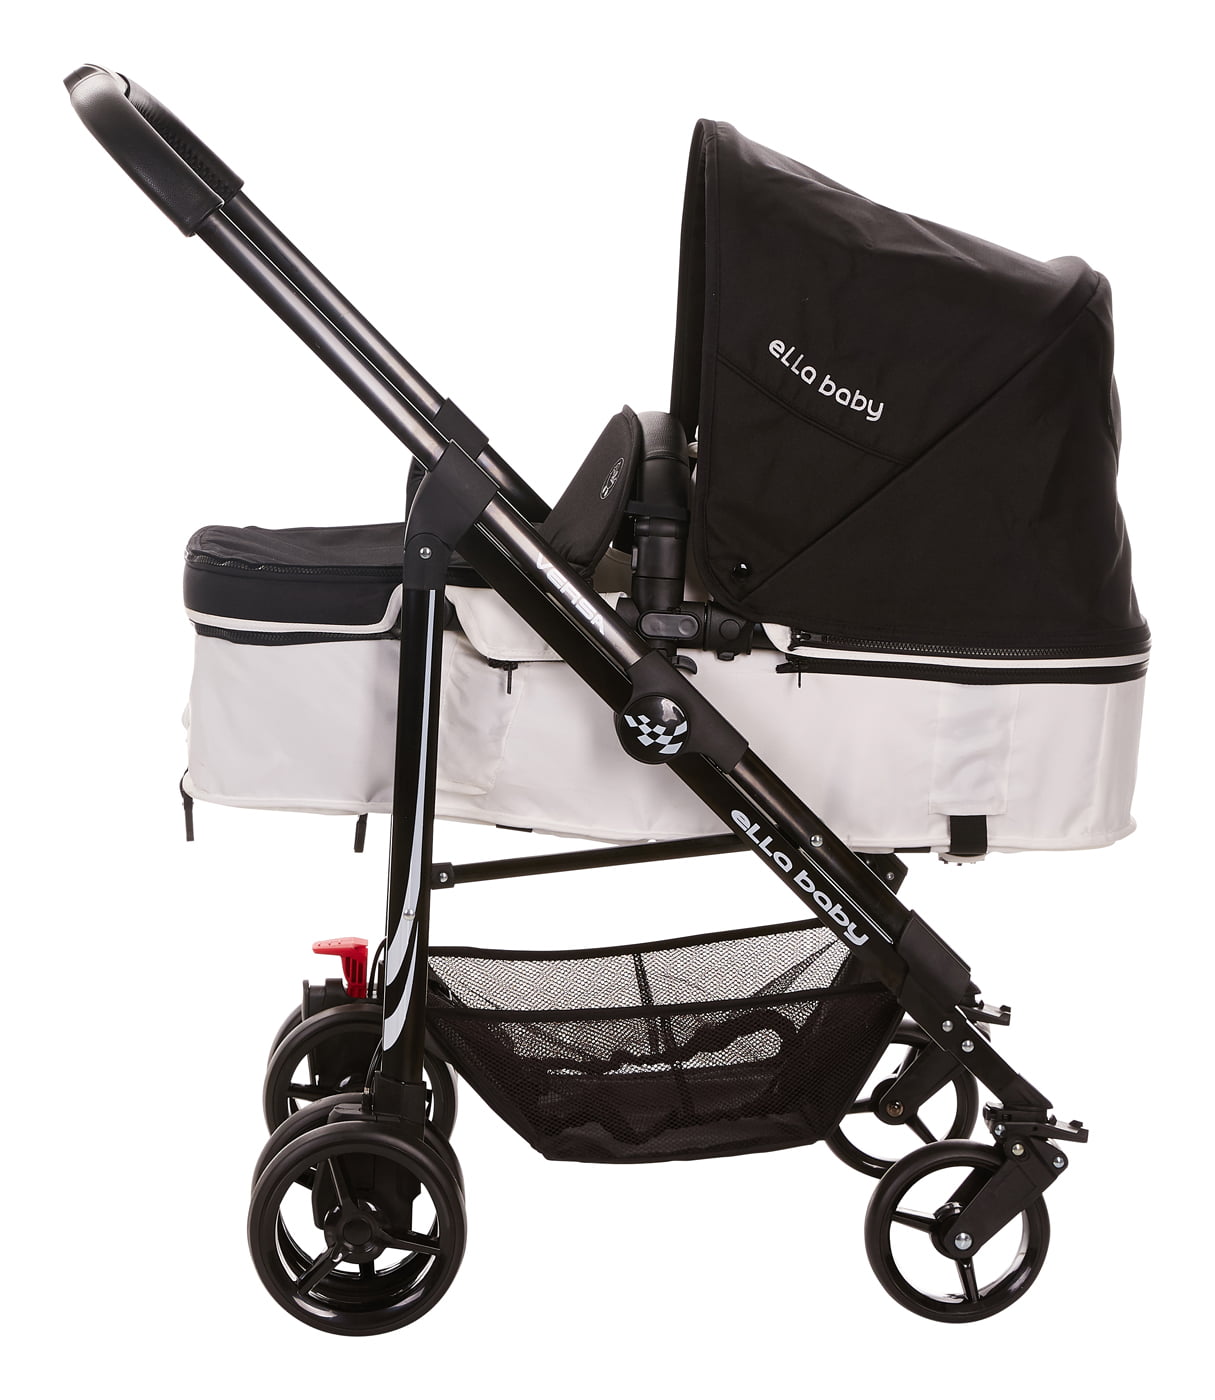 3 in 1 stroller with car seat